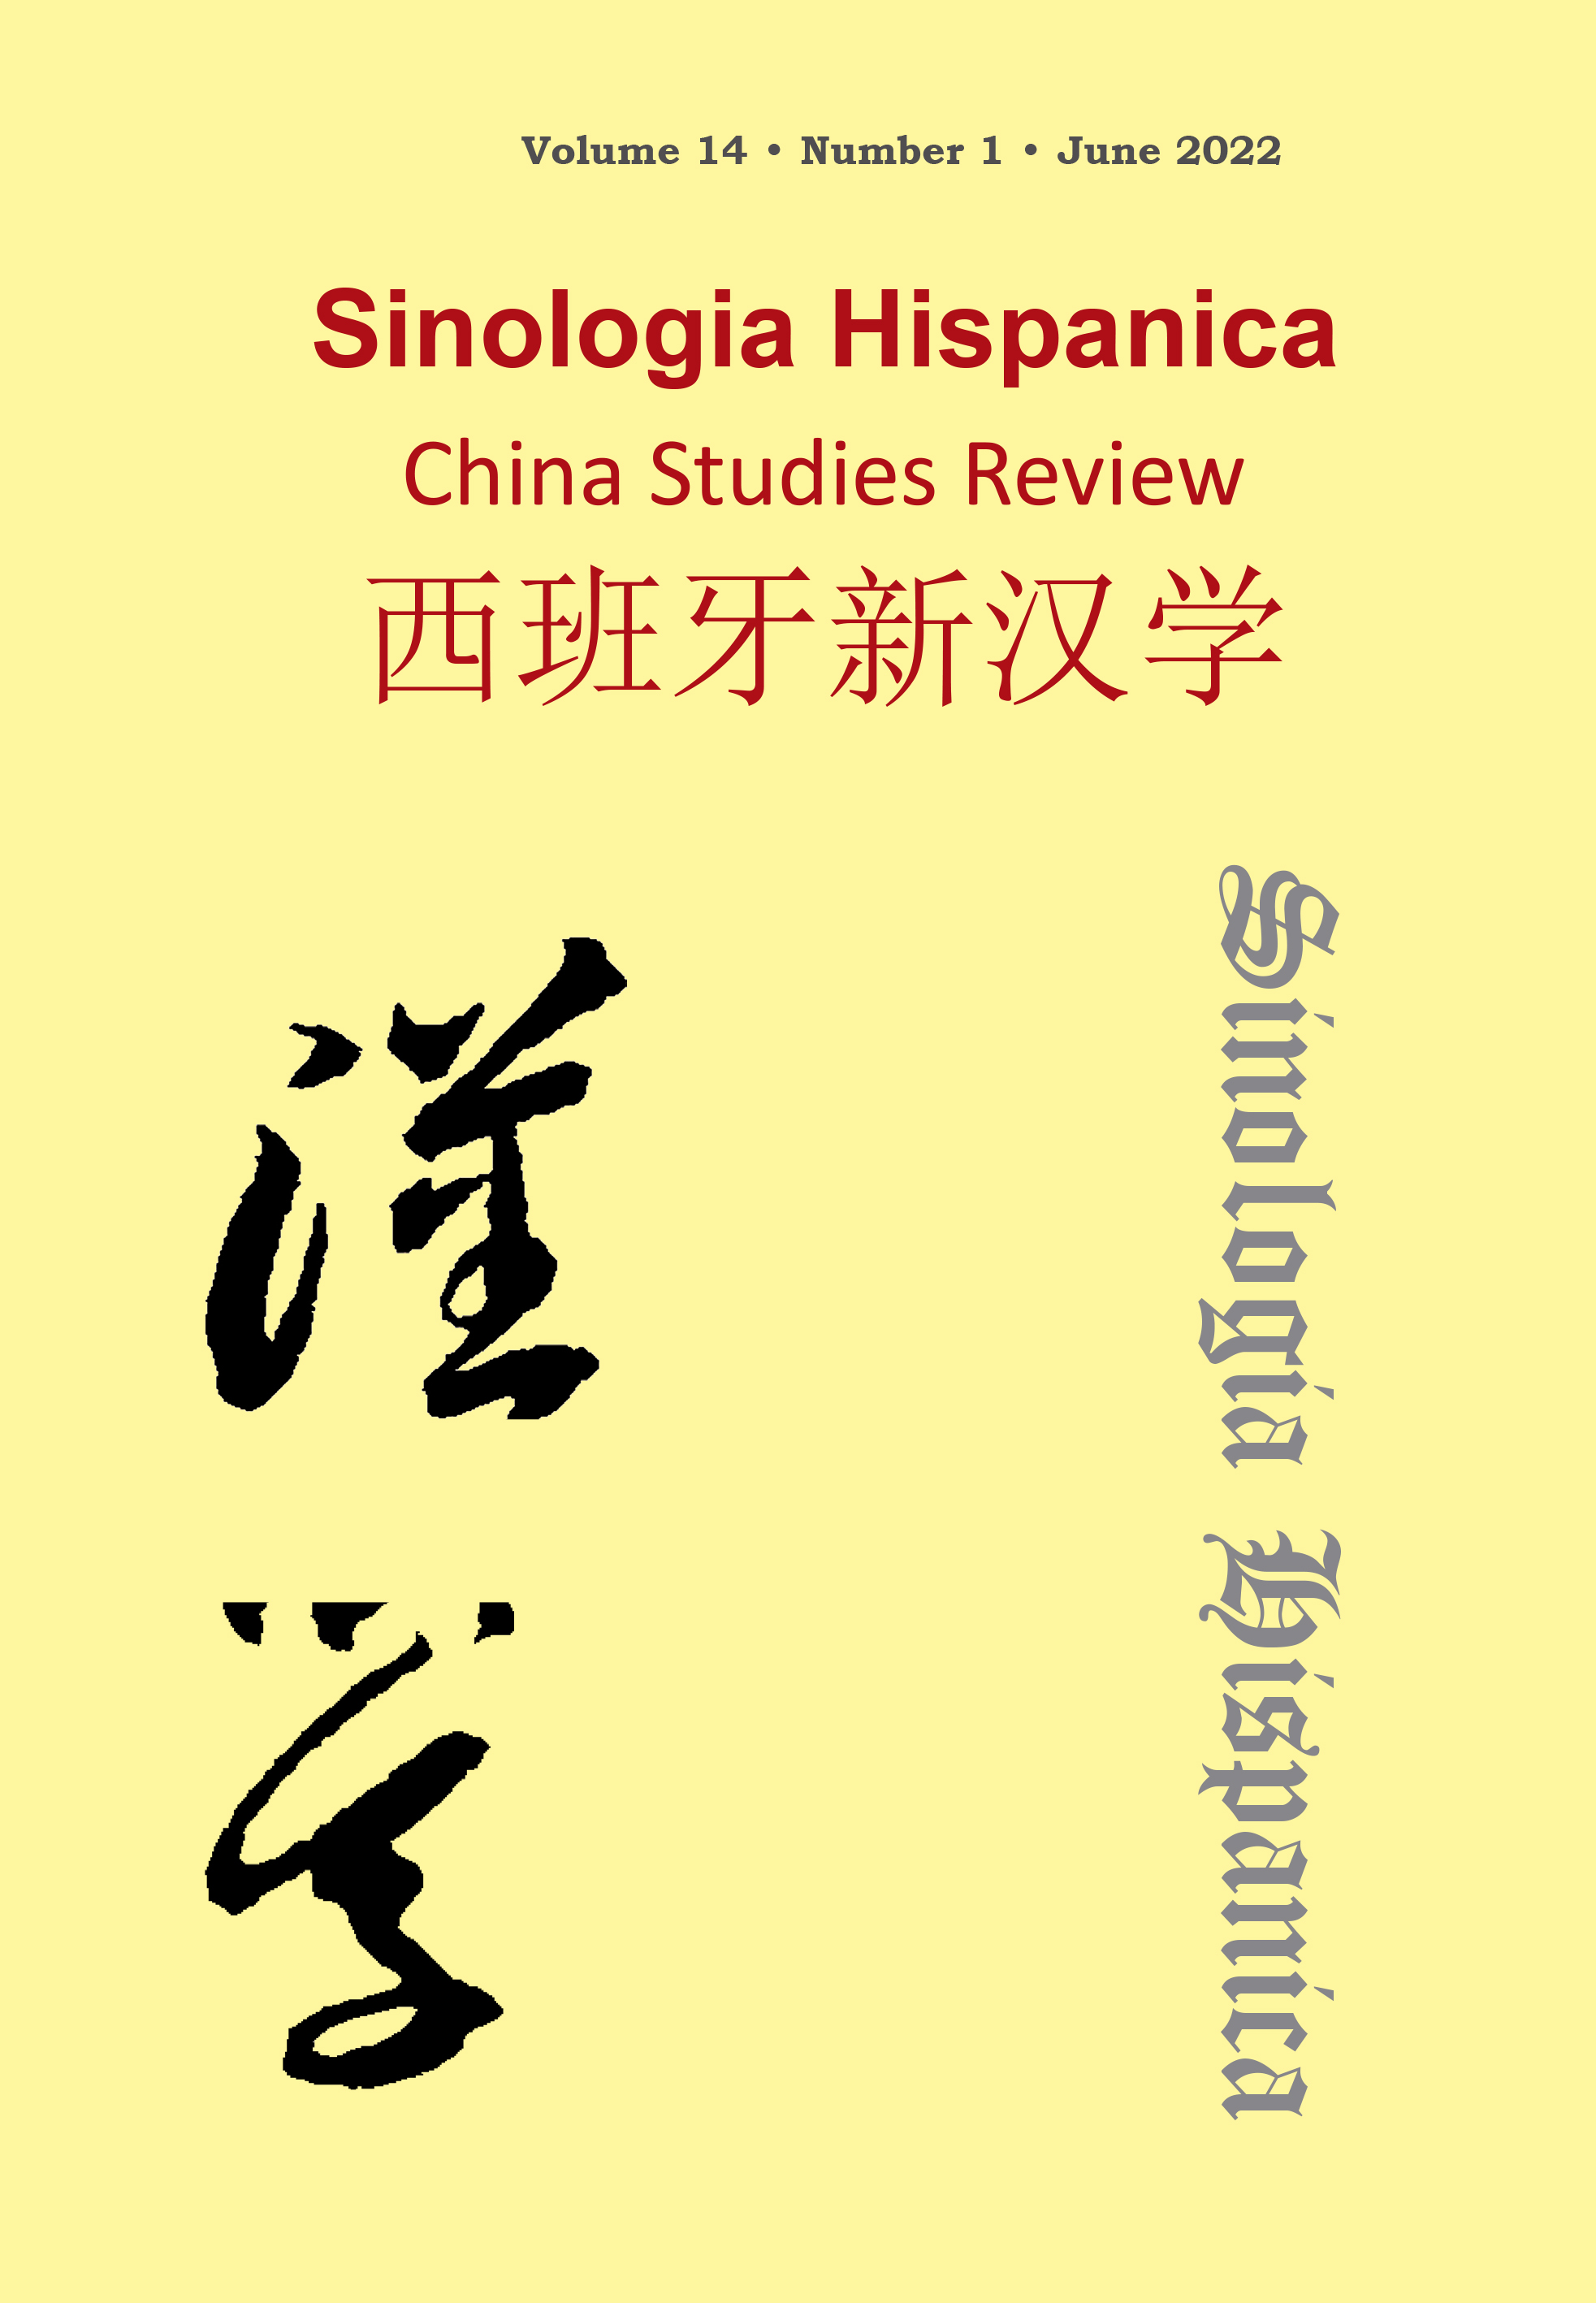 China's Education Policy in Rural Areas in the Early 21st Century and Its Impact on Sichuan Province